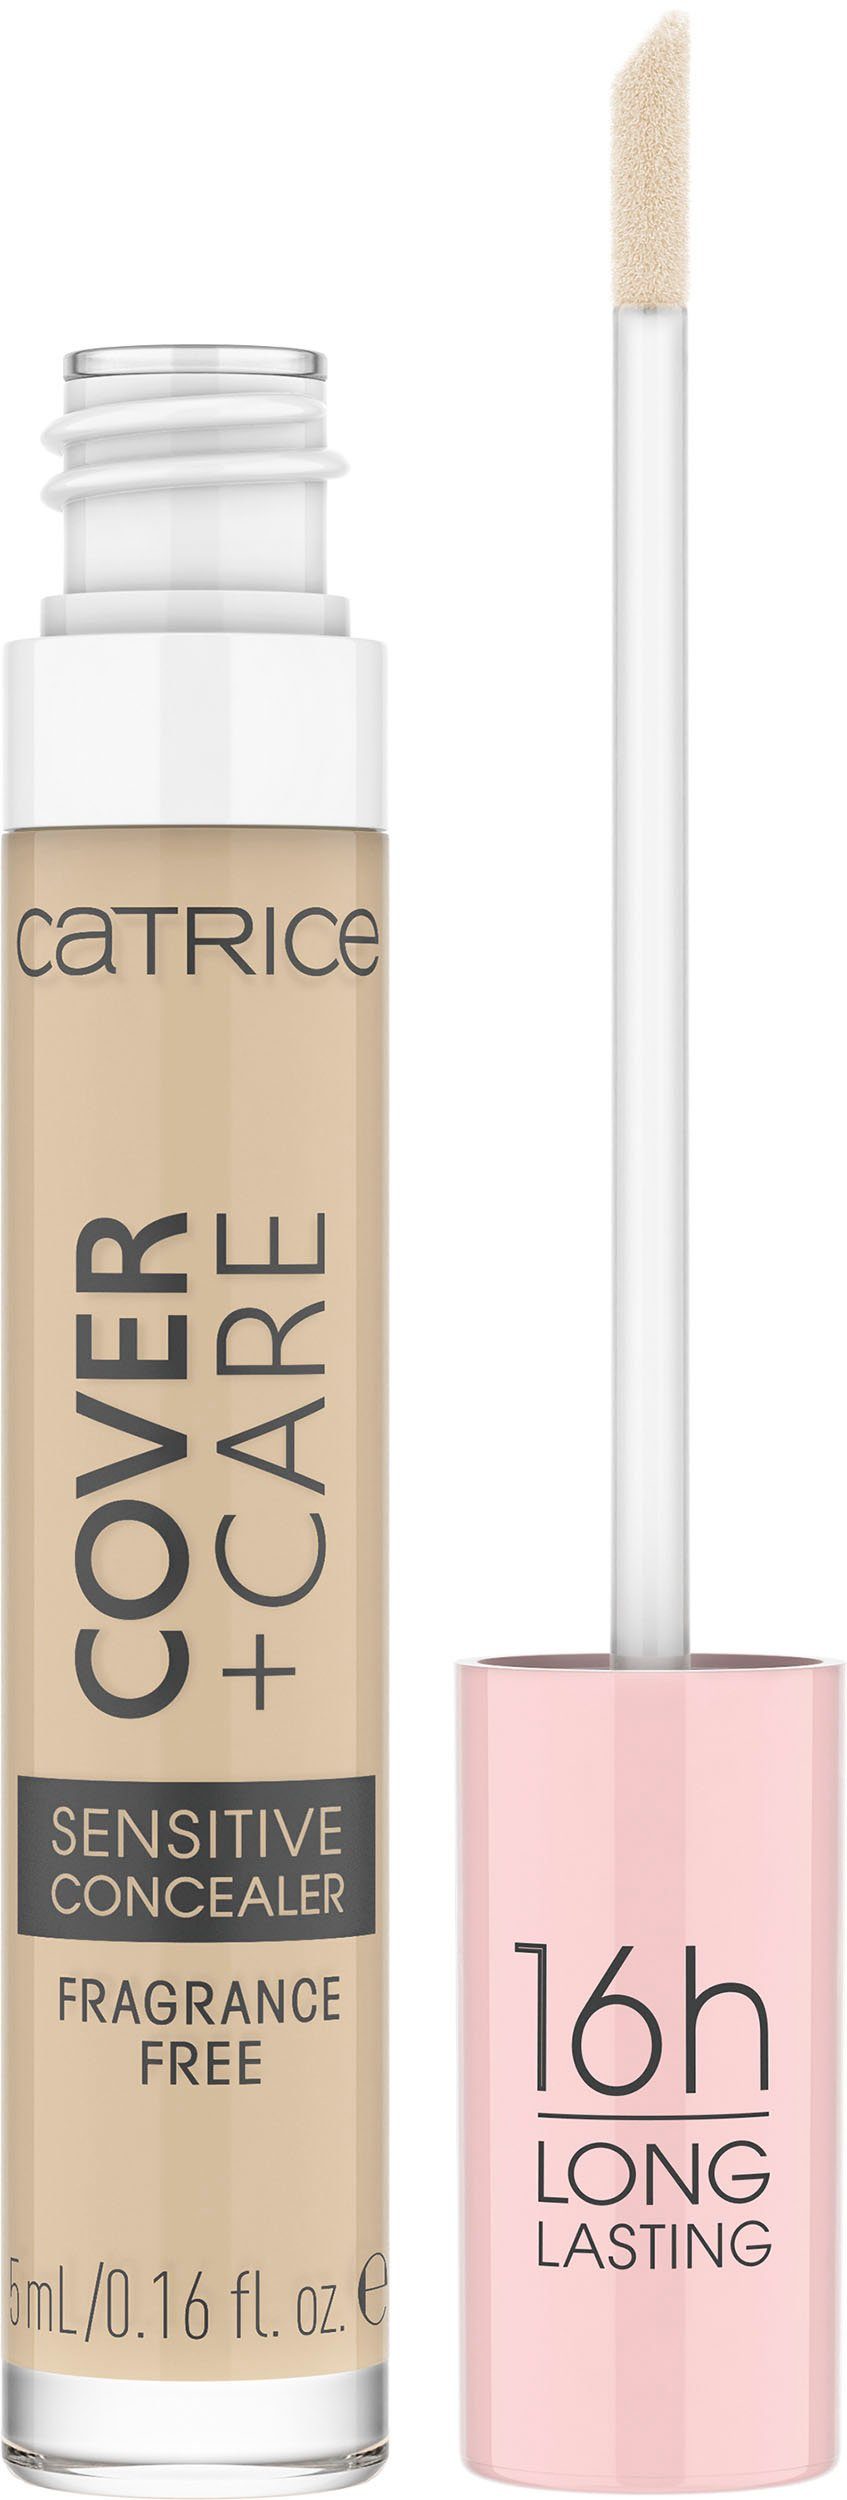 Concealer Care Catrice nude Concealer, Cover 002N Sensitive Catrice 3-tlg. +